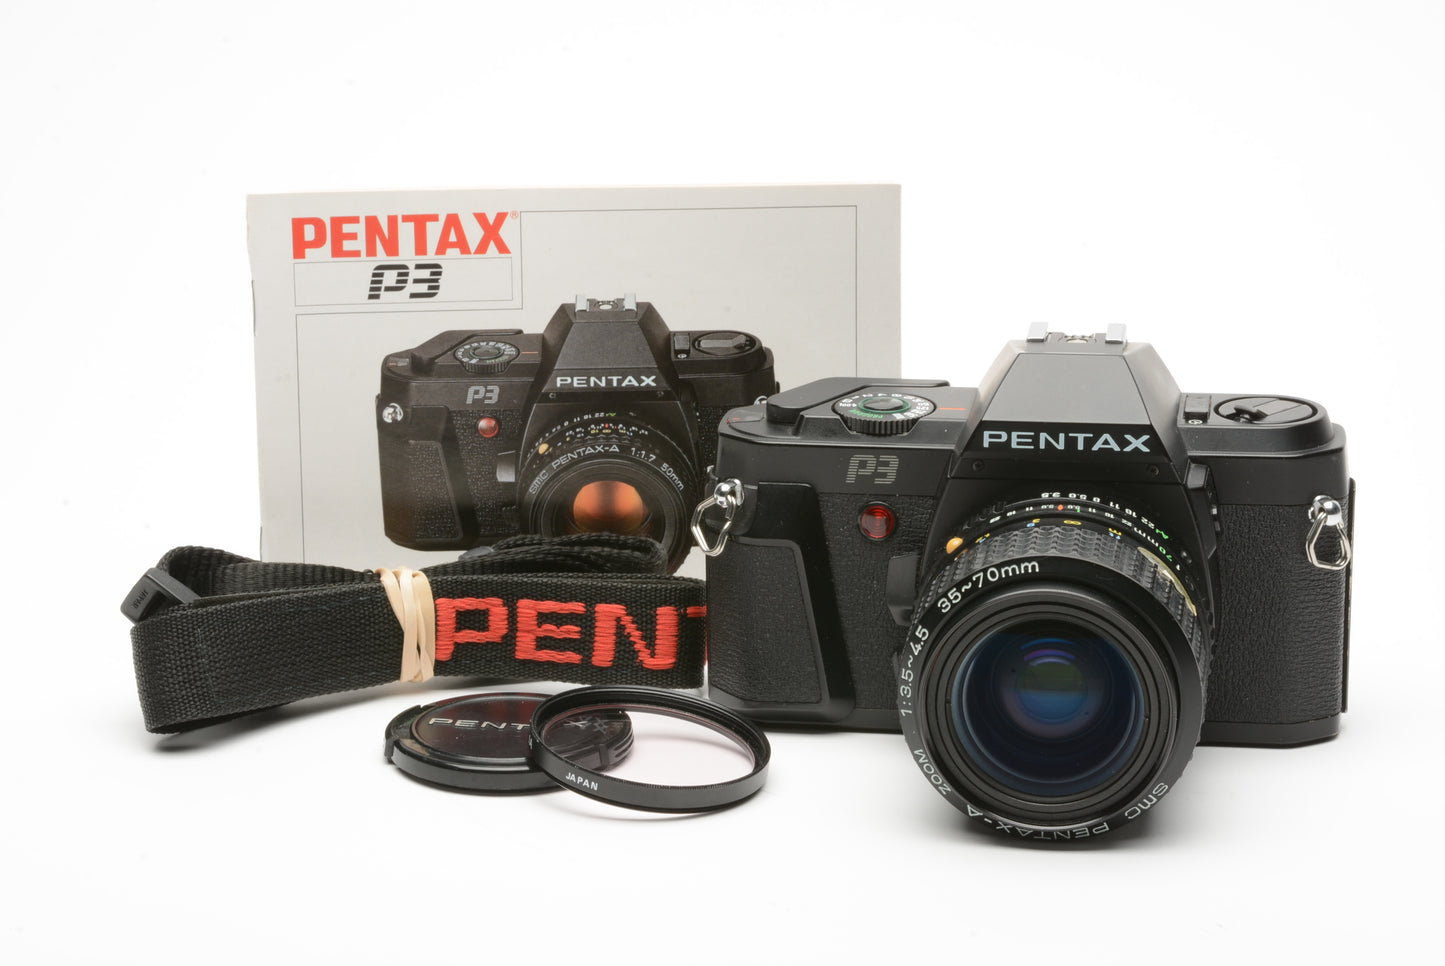 Pentax P3 35mm SLR camera w/SMC 35-70mm f3.5-4.5 zoom lens, tested, great!